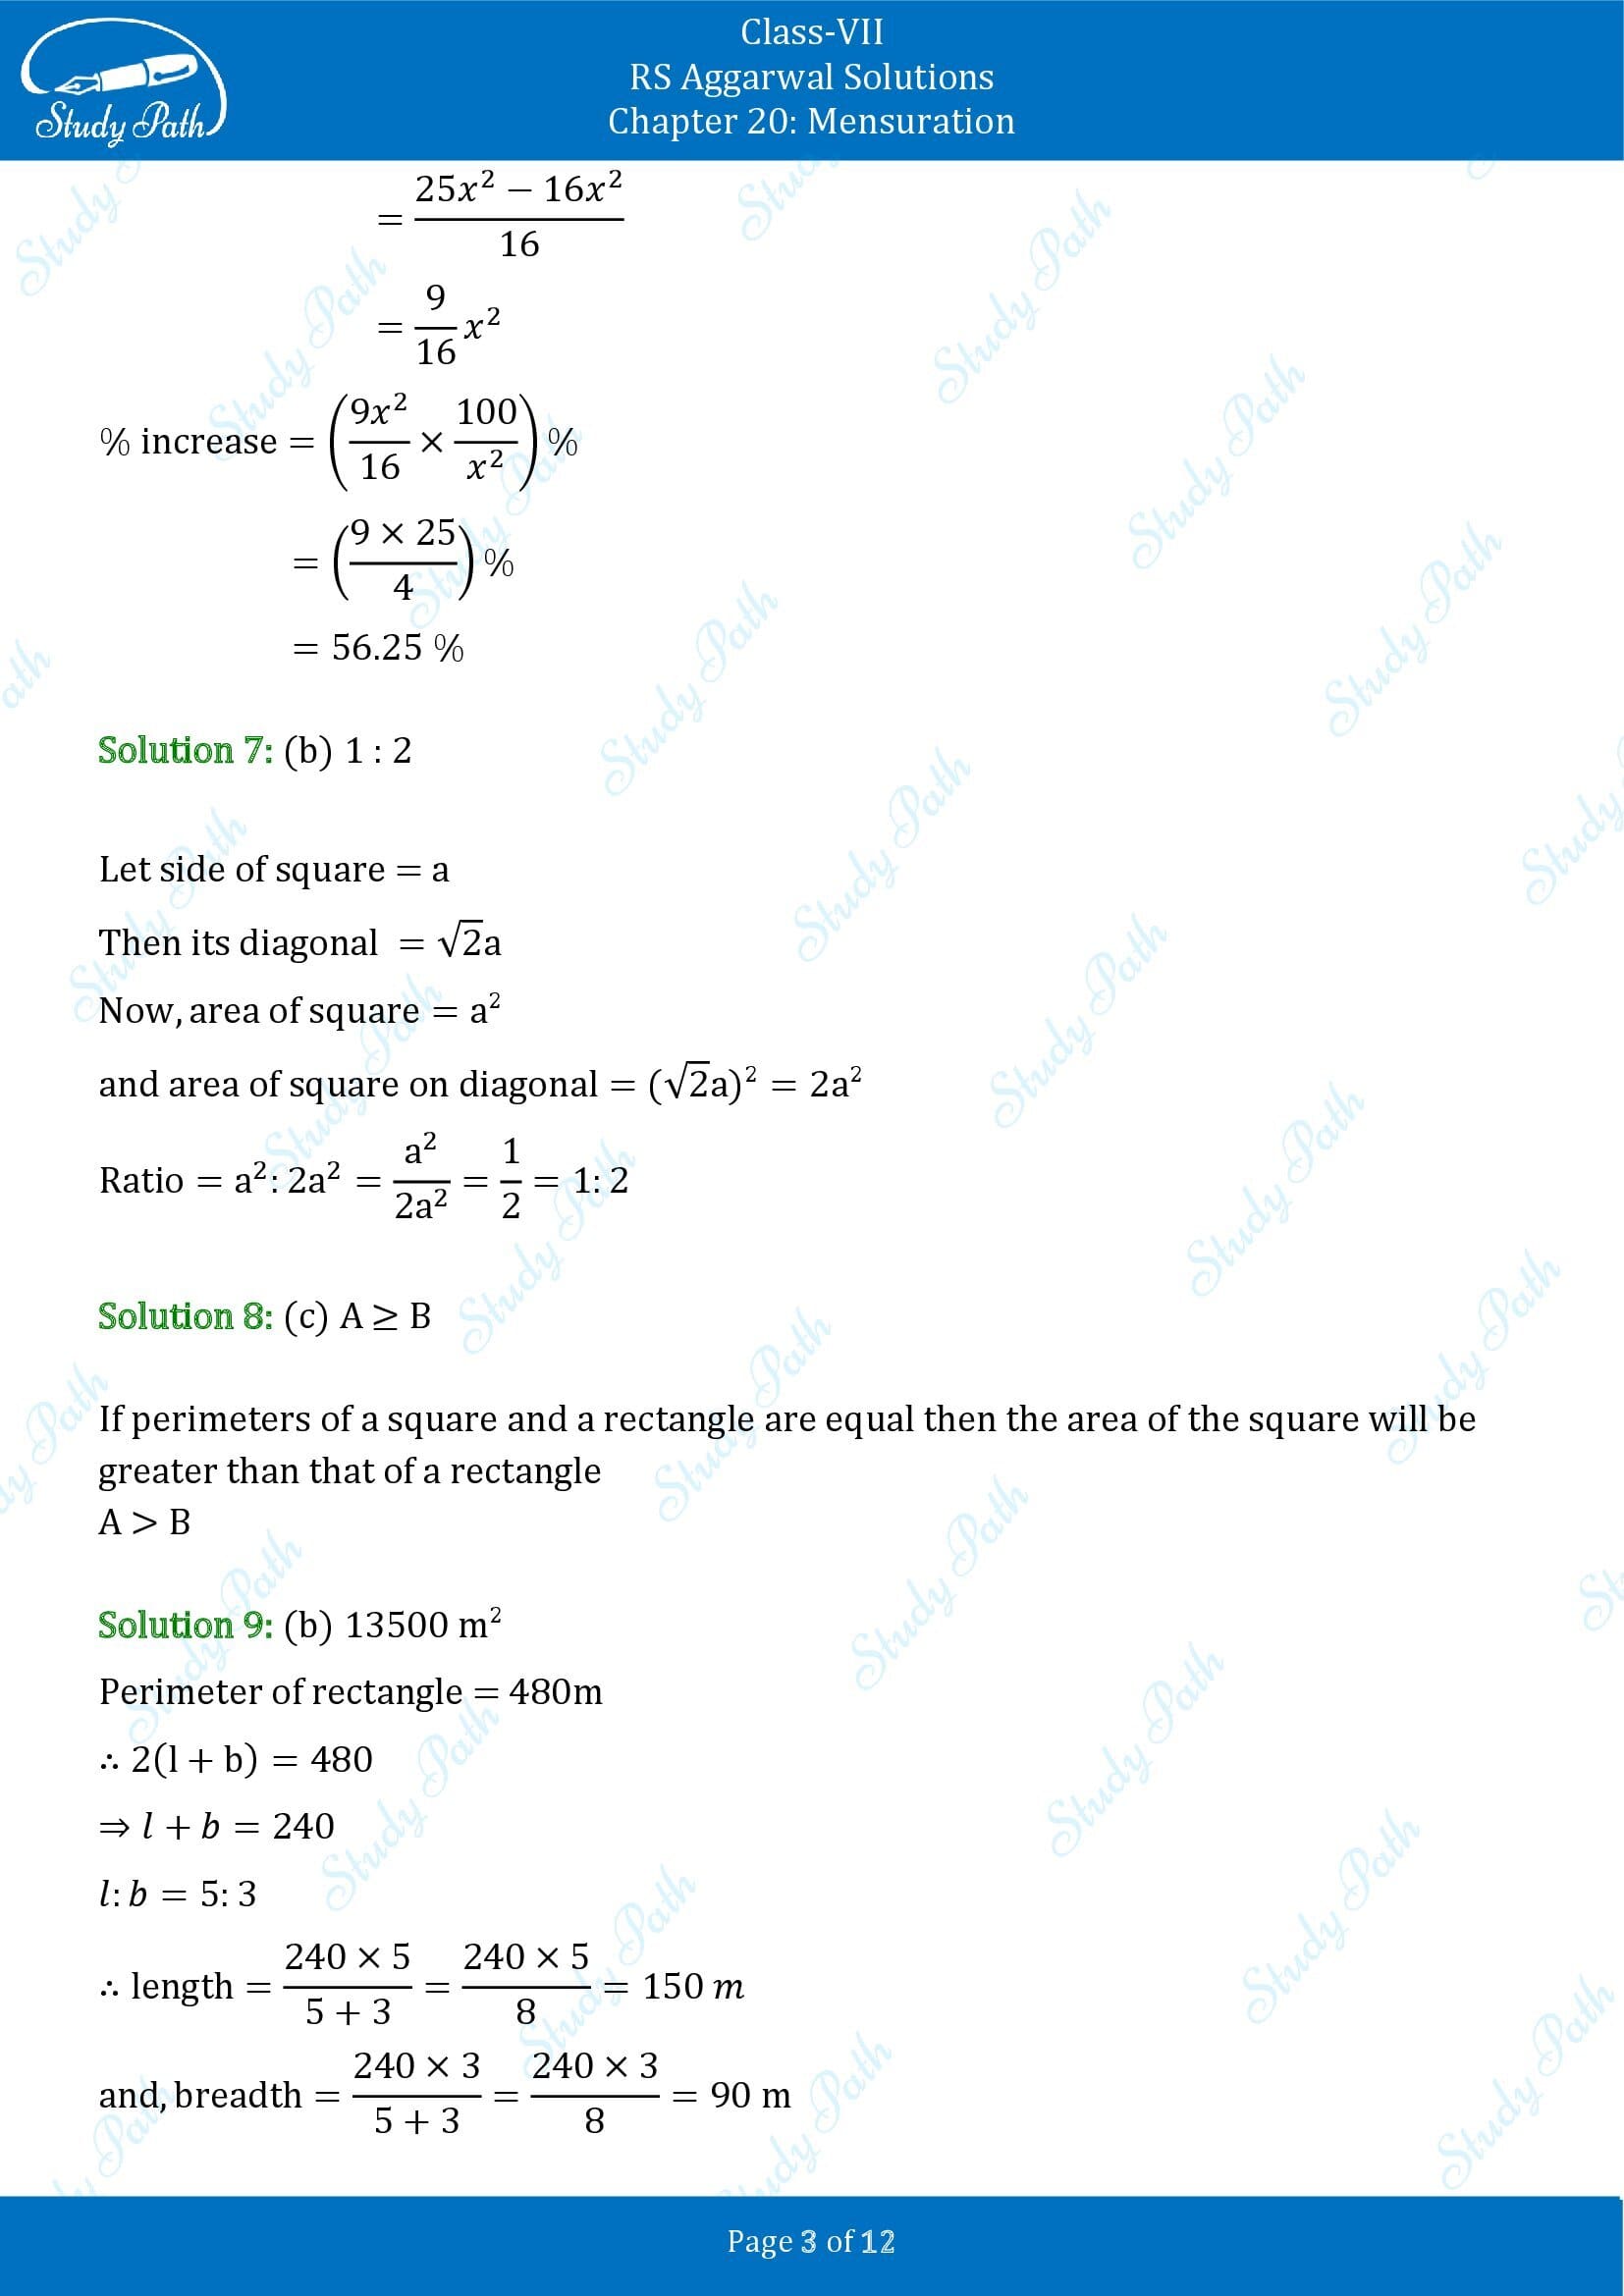 RS Aggarwal Solutions Class 7 Chapter 20 Mensuration Exercise 20G MCQ 00003